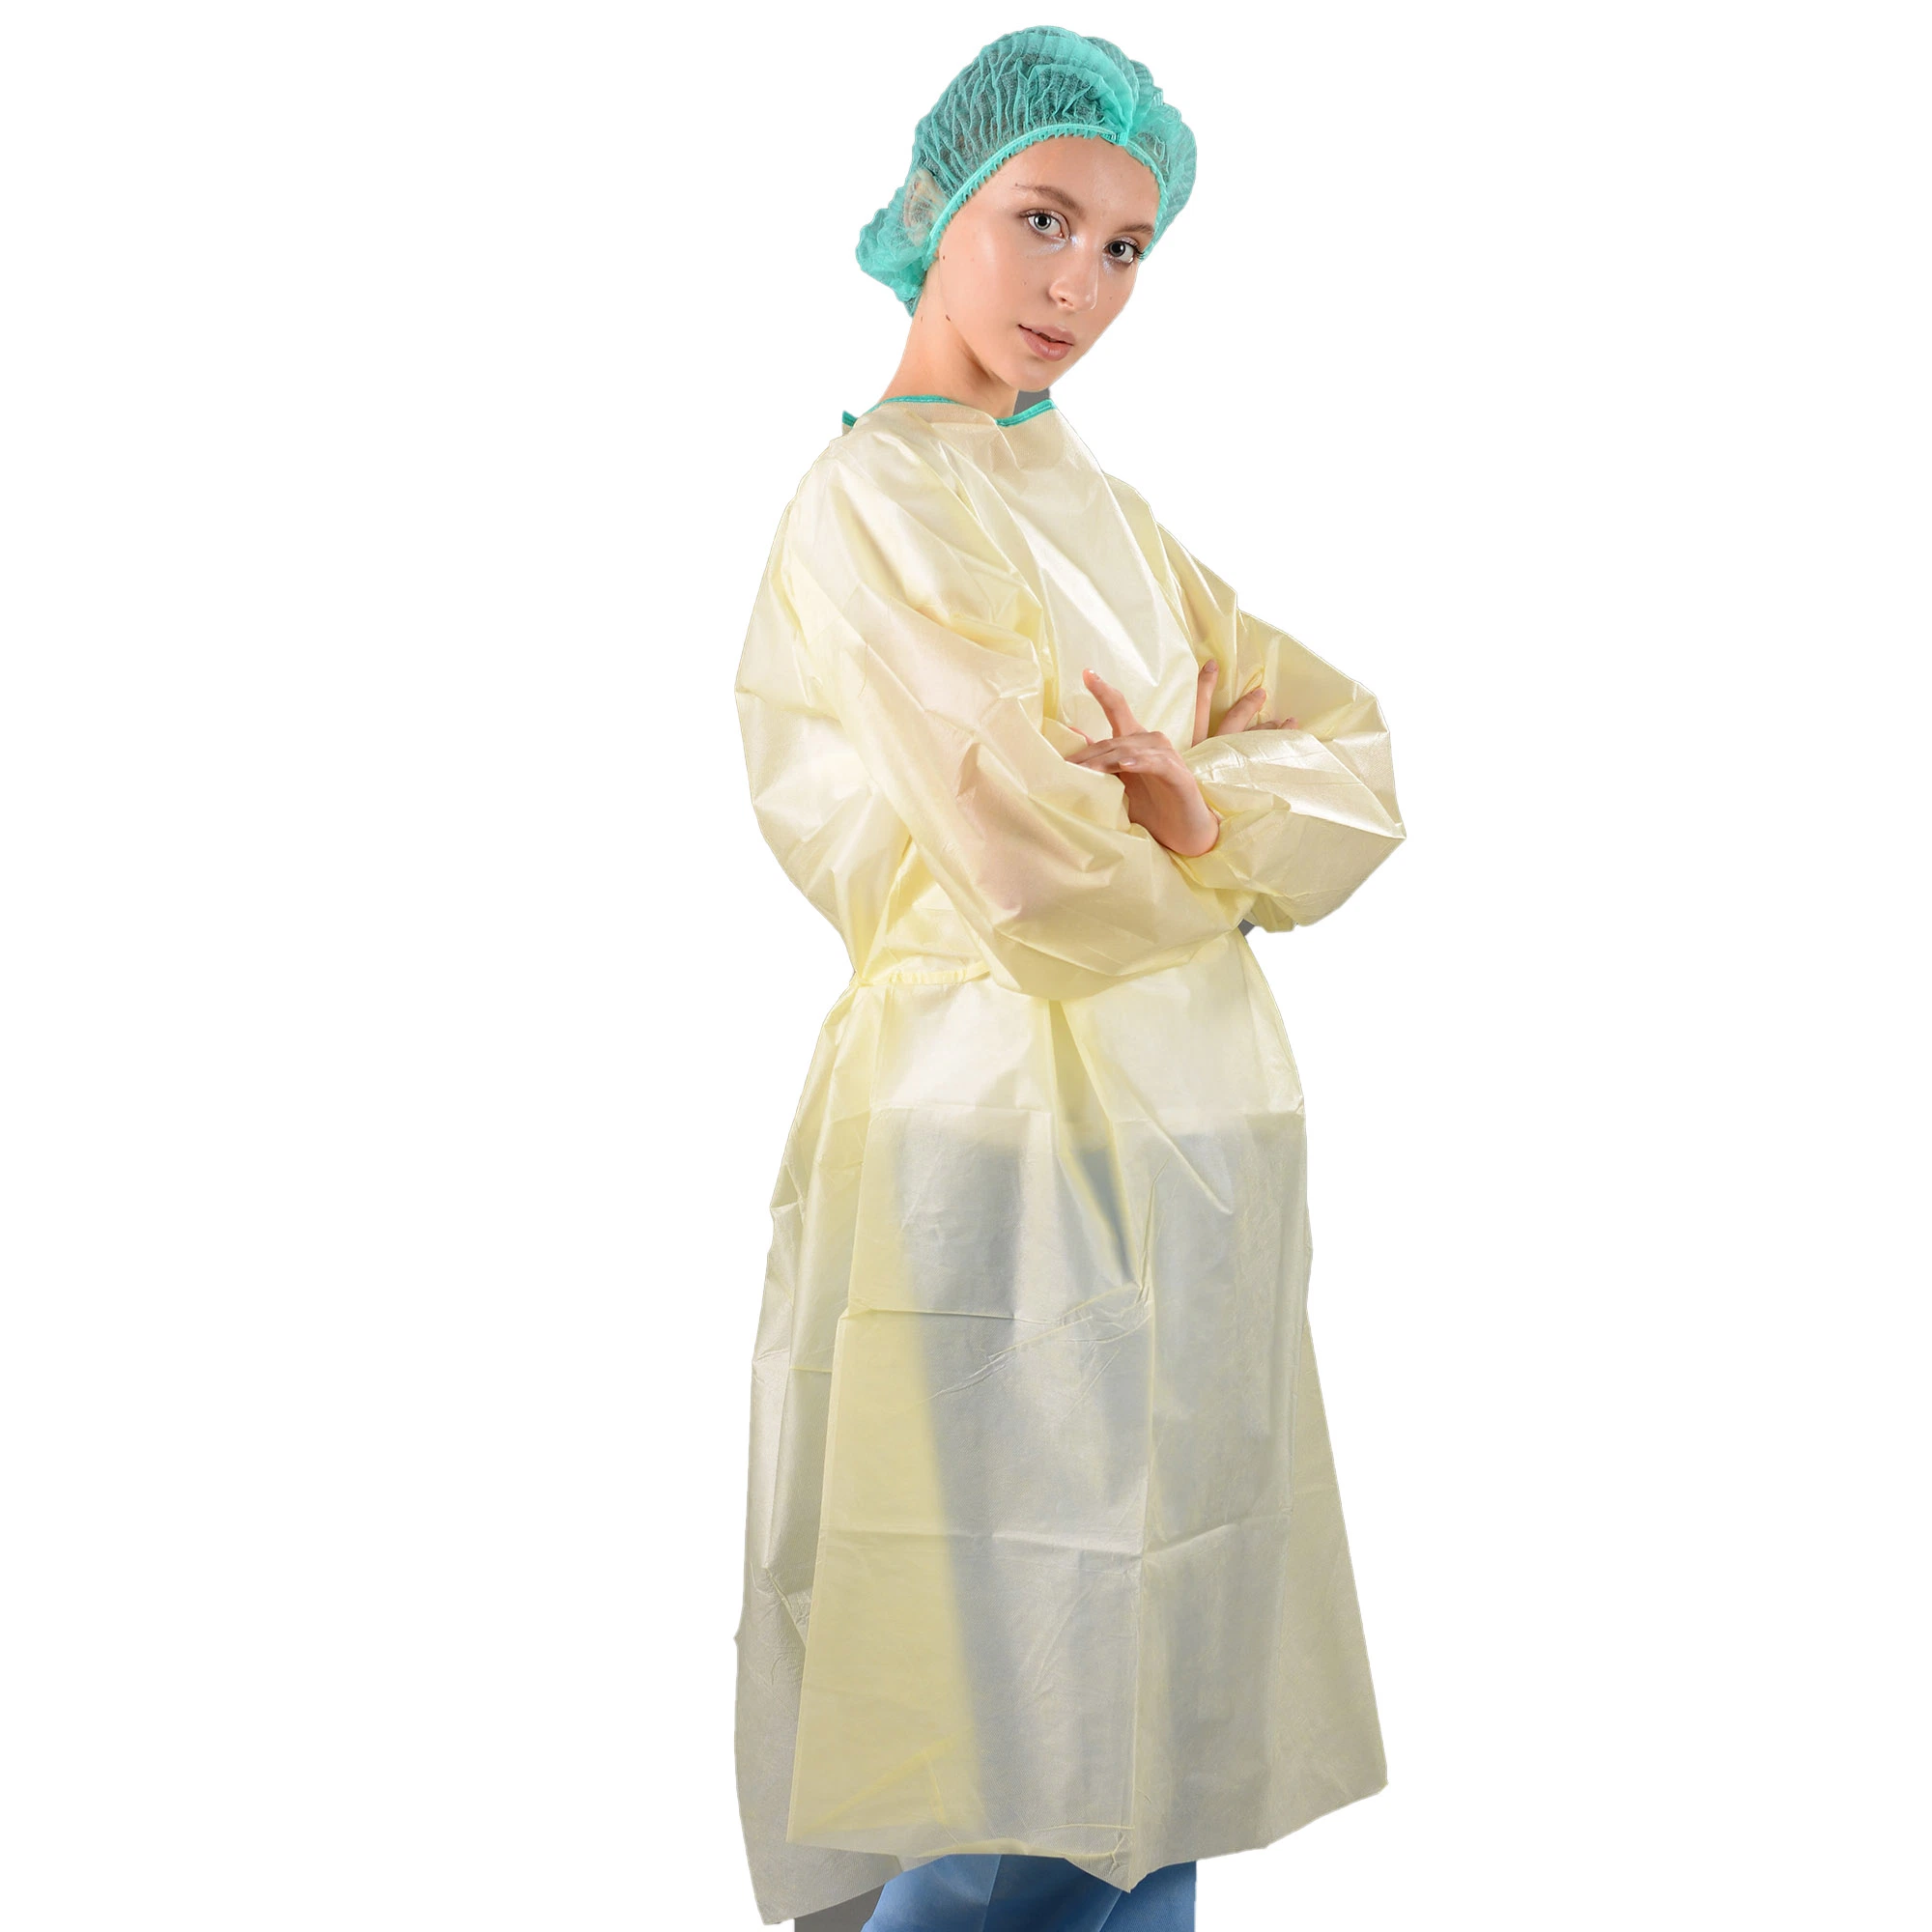 Medical Surgical Gown Isolation Grown in Safety Clothing